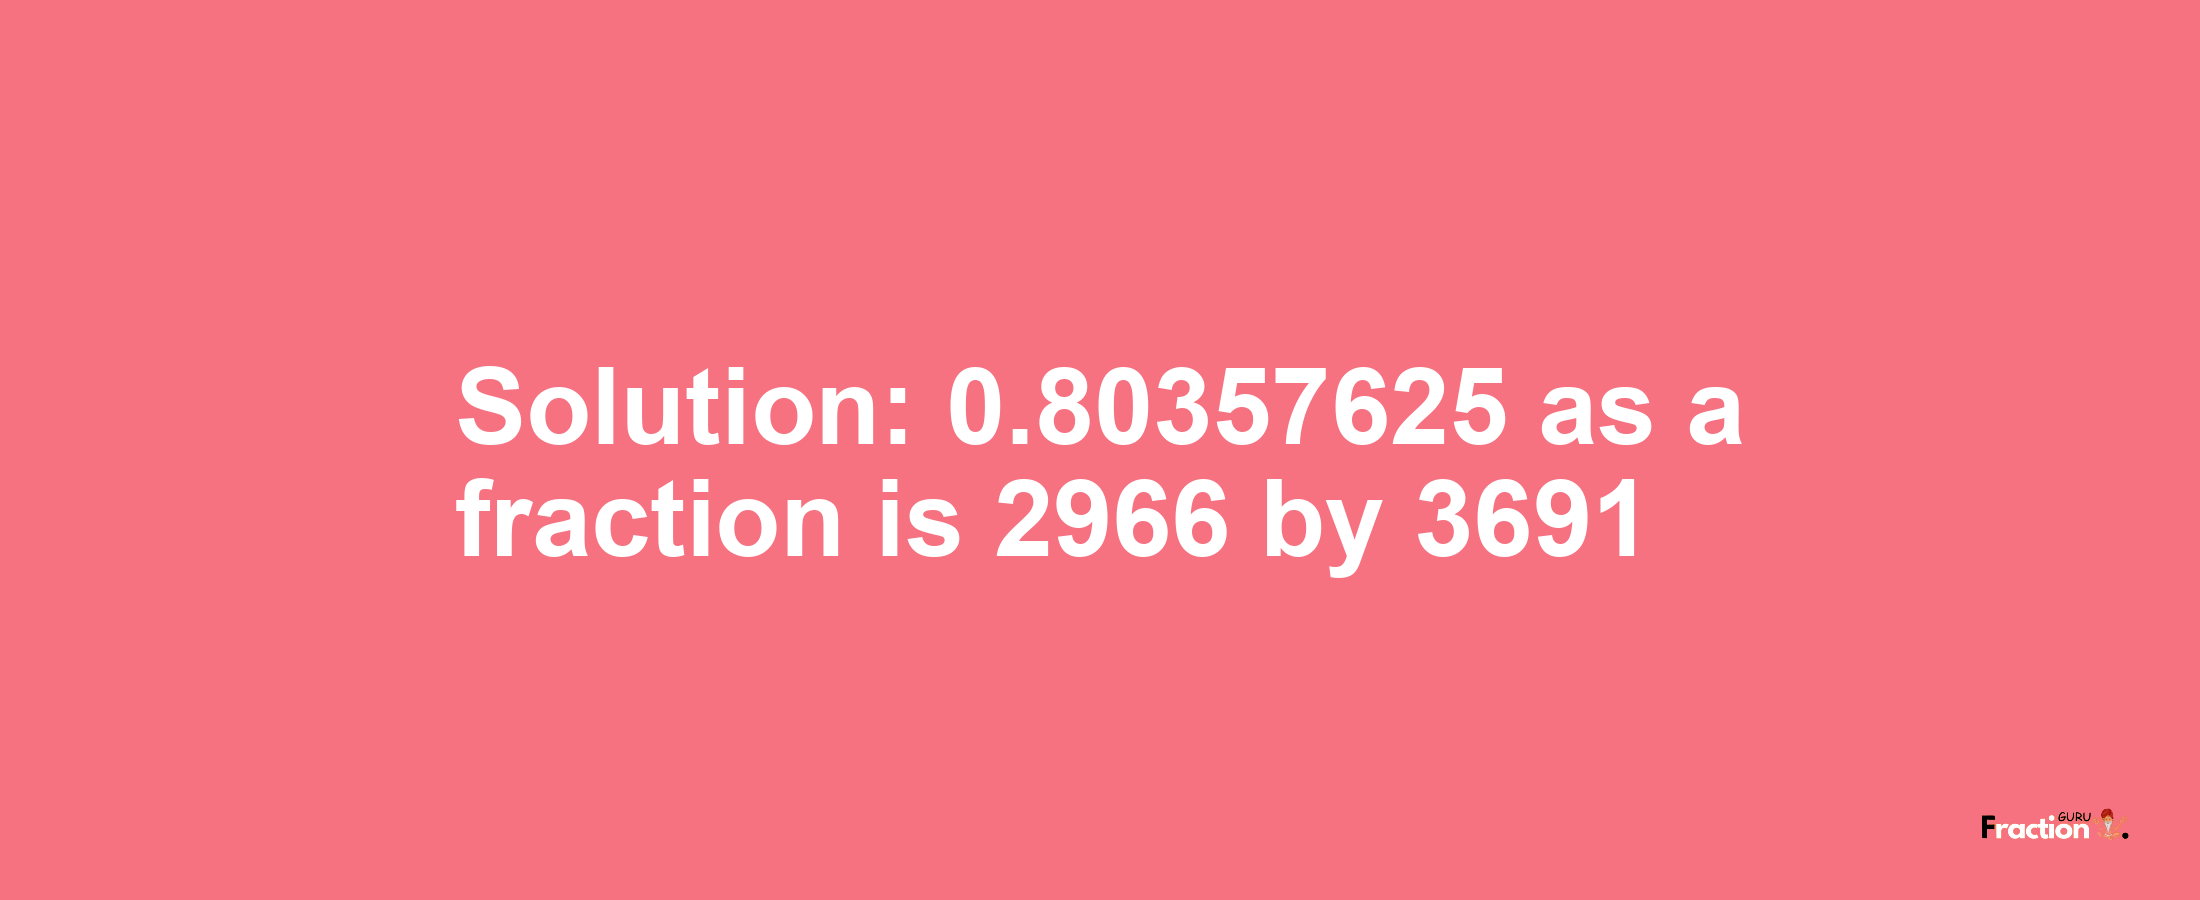 Solution:0.80357625 as a fraction is 2966/3691